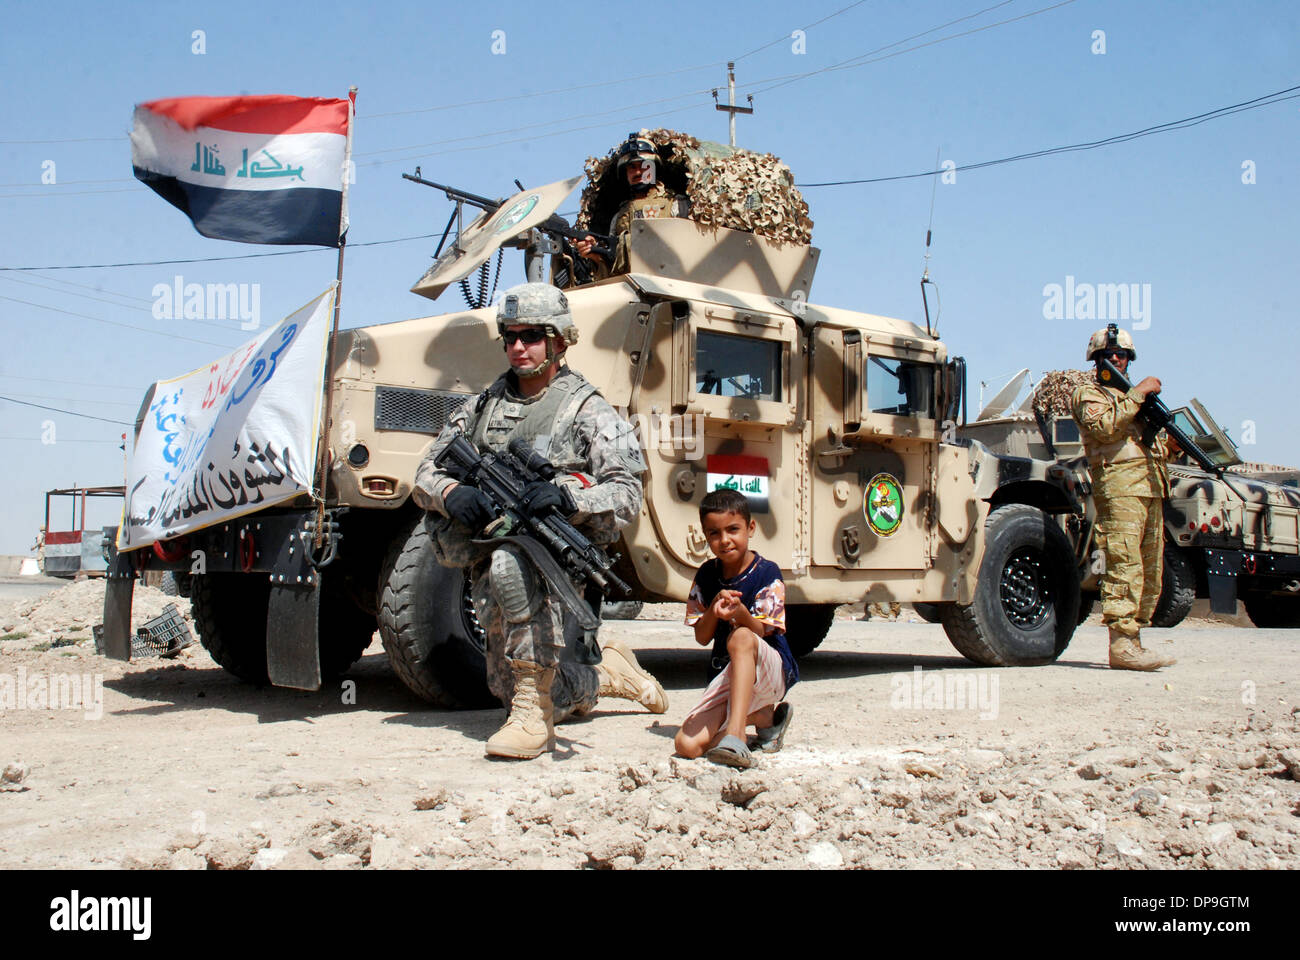 U.S. soldier provides security, along with a local child, in Basra Province, Iraq Stock Photo